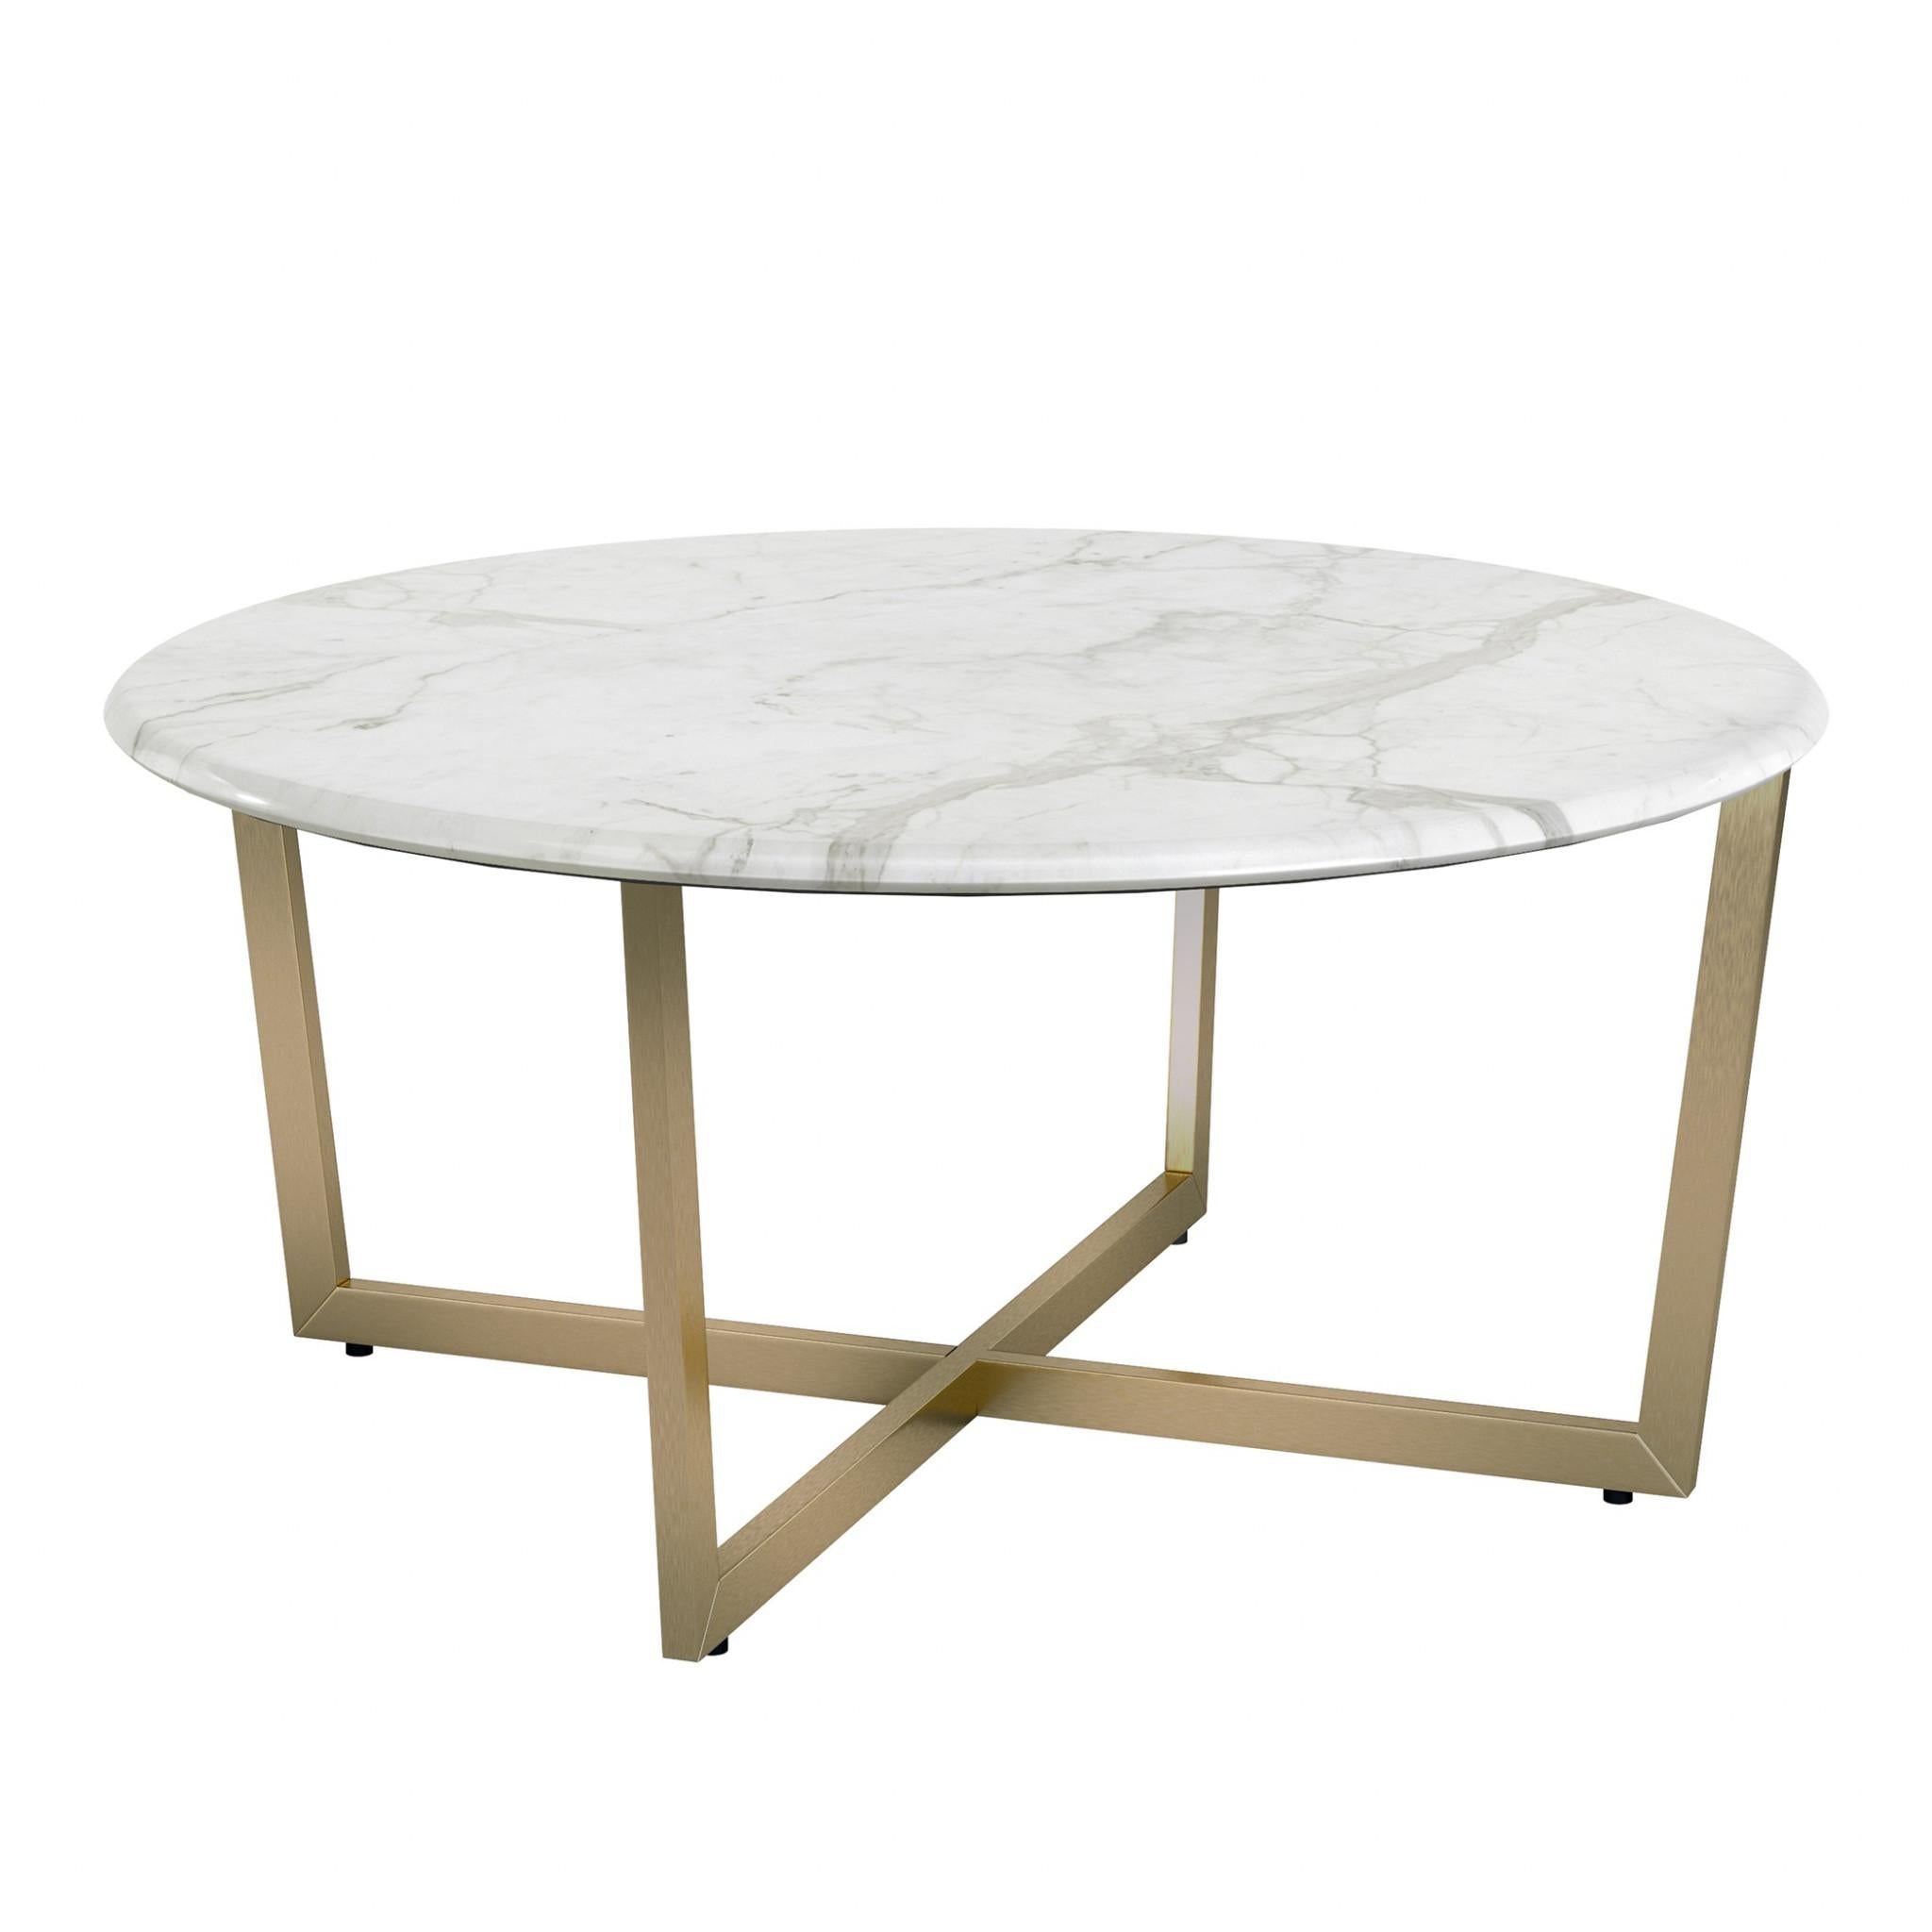 White on Gold Faux Marble Round Coffee Table